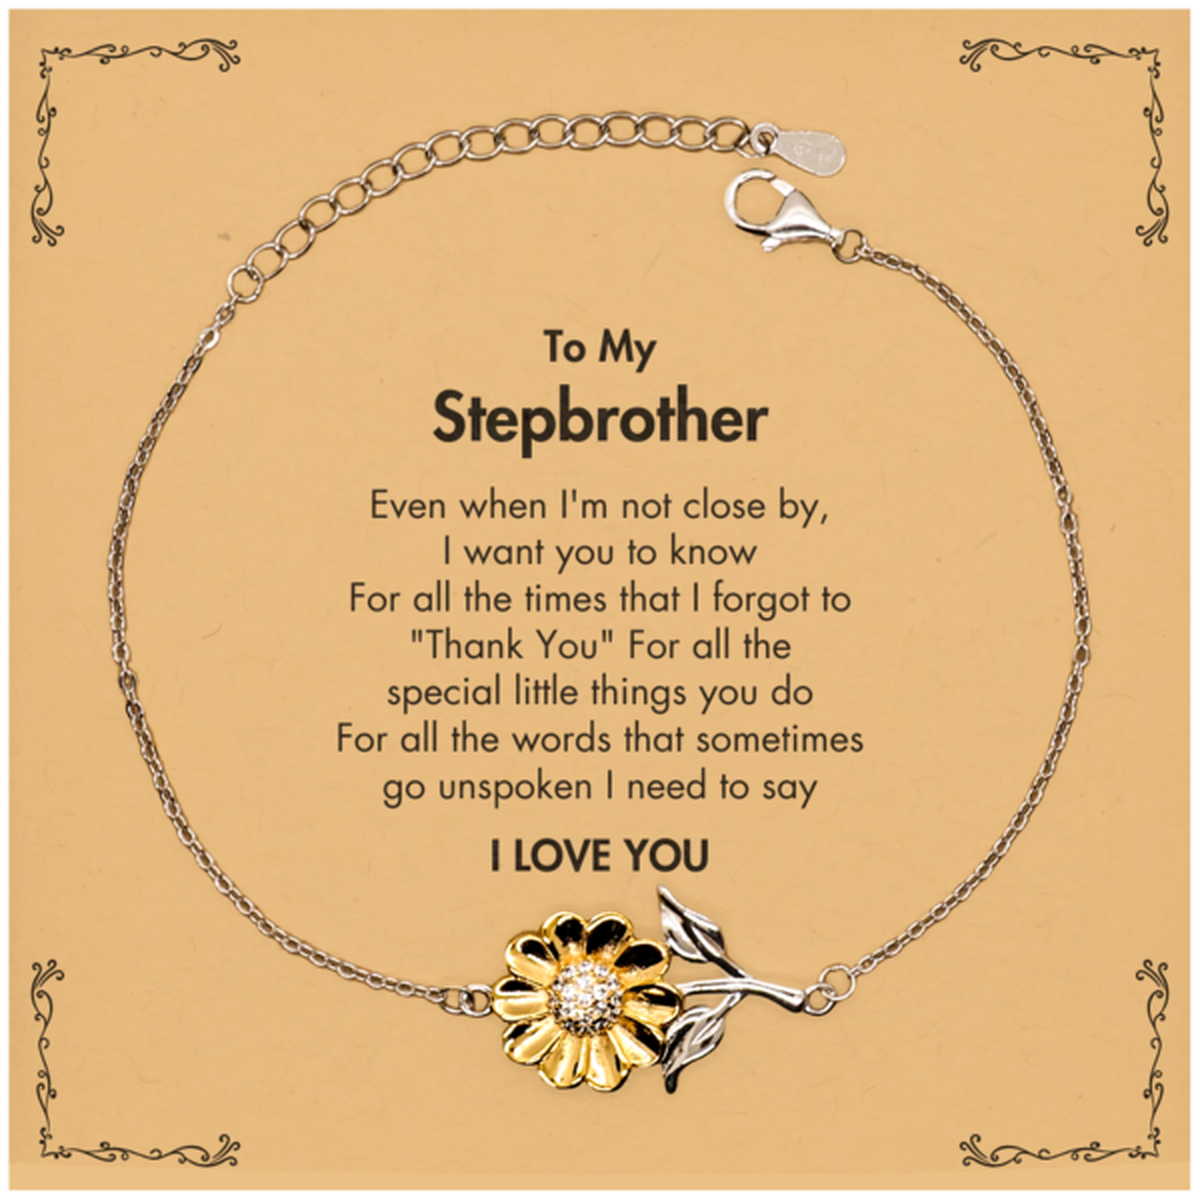 Thank You Gifts for Stepbrother, Keepsake Sunflower Bracelet Gifts for Stepbrother Birthday Mother's day Father's Day Stepbrother For all the words That sometimes go unspoken I need to say I LOVE YOU